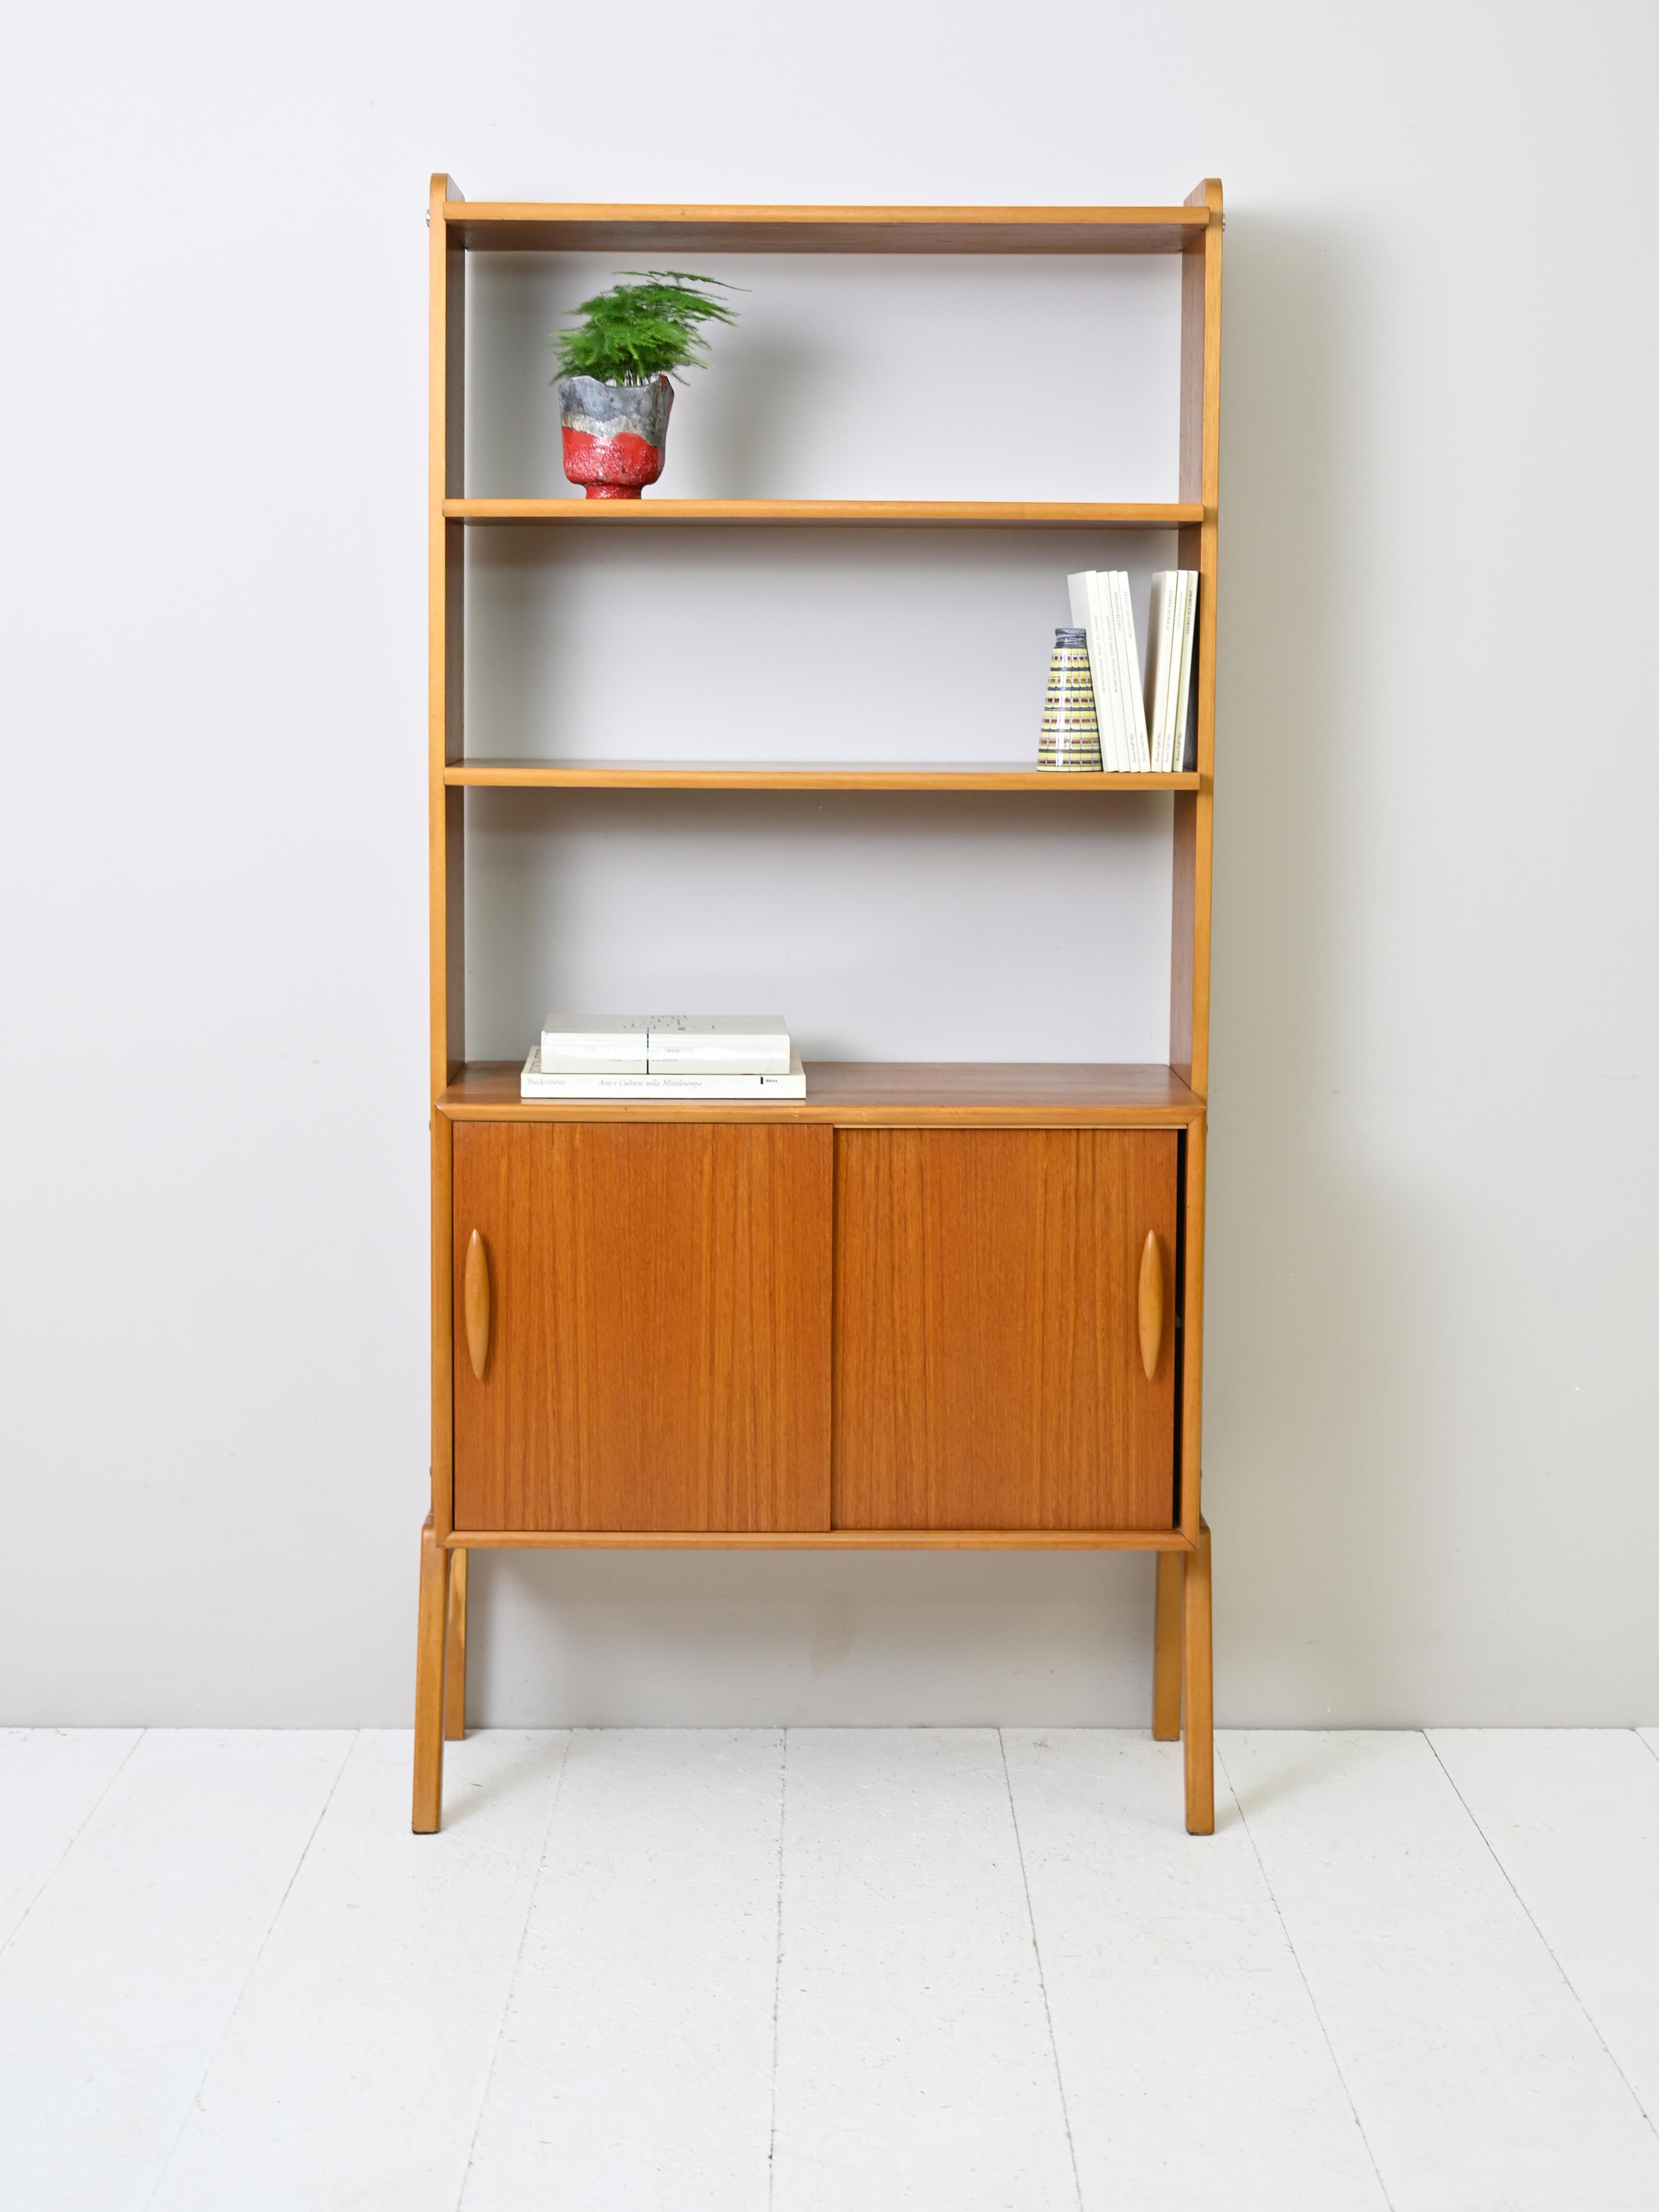 Vintage Swedish cabinet with classic mid-century lines.

The lower part is a small sideboard with storage space and sliding doors while the upper part is a bookcase with two adjustable-height shelves.

The carved wooden door handles and minimal